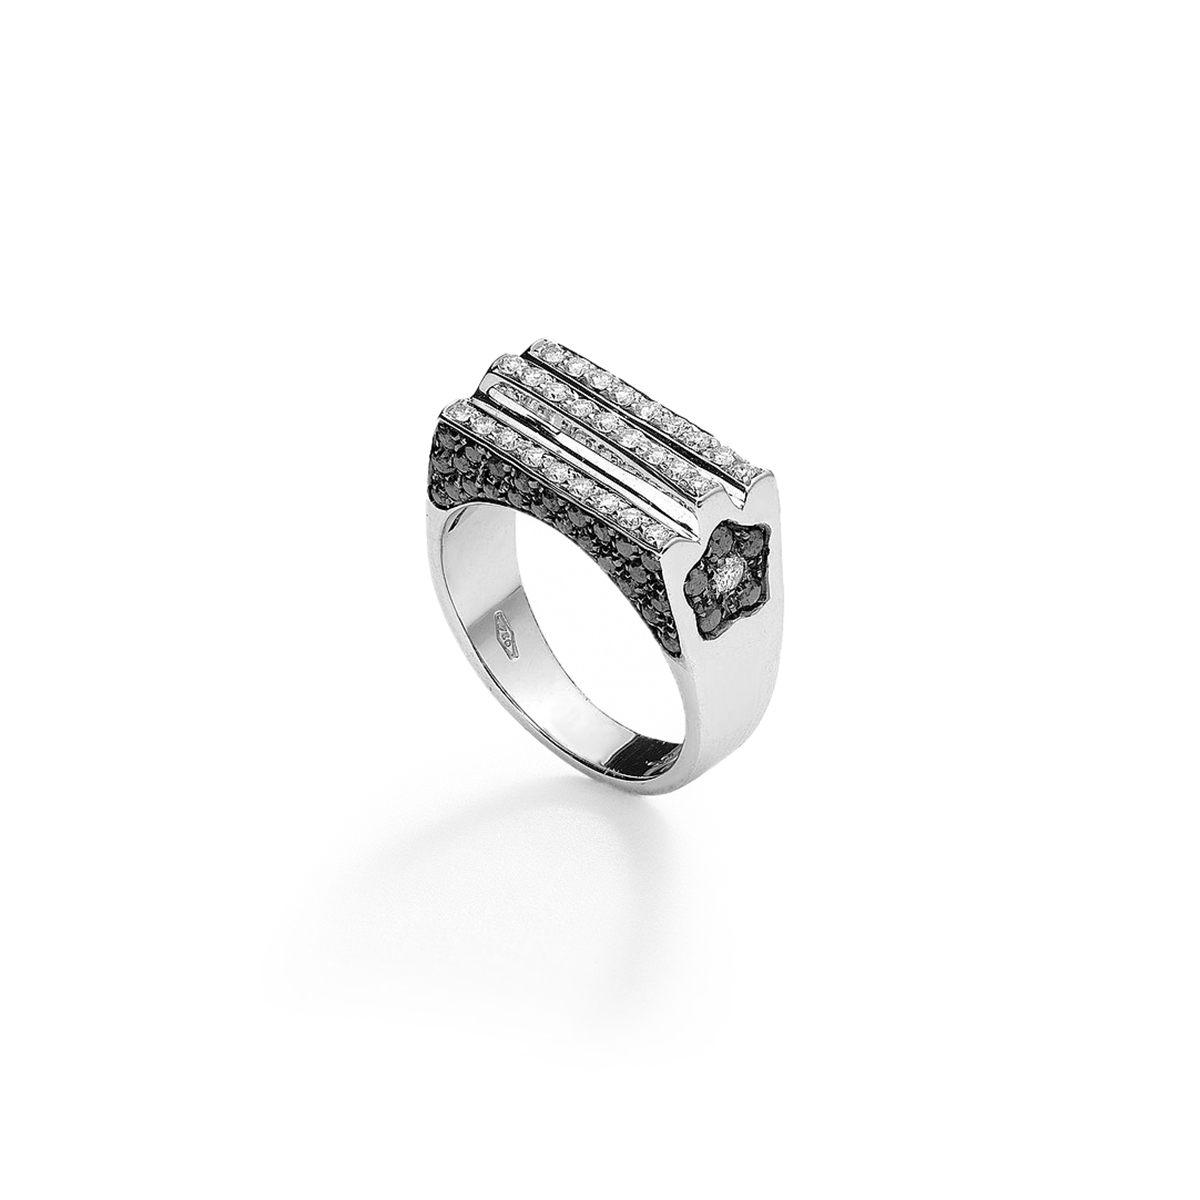 jewels-diamonds-black-and-white-18kt-white-gold-ring